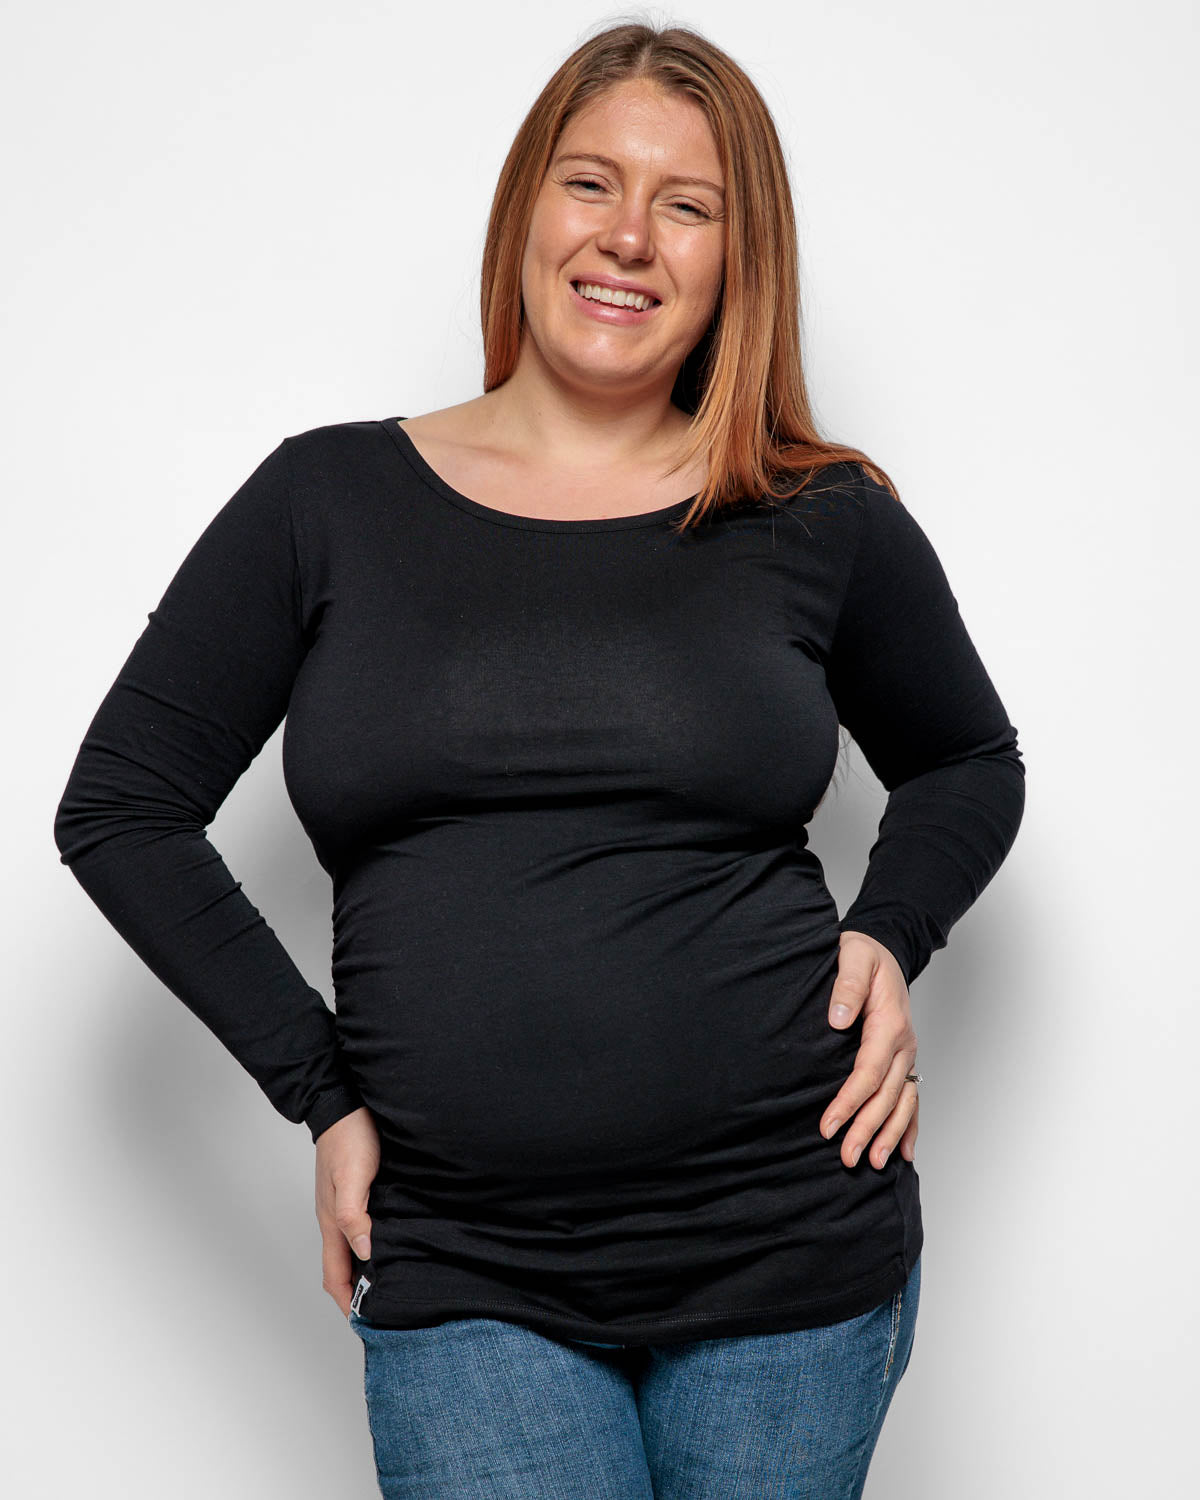 Maternity Long Sleeve Top in Black Organic Cotton for pregnancy